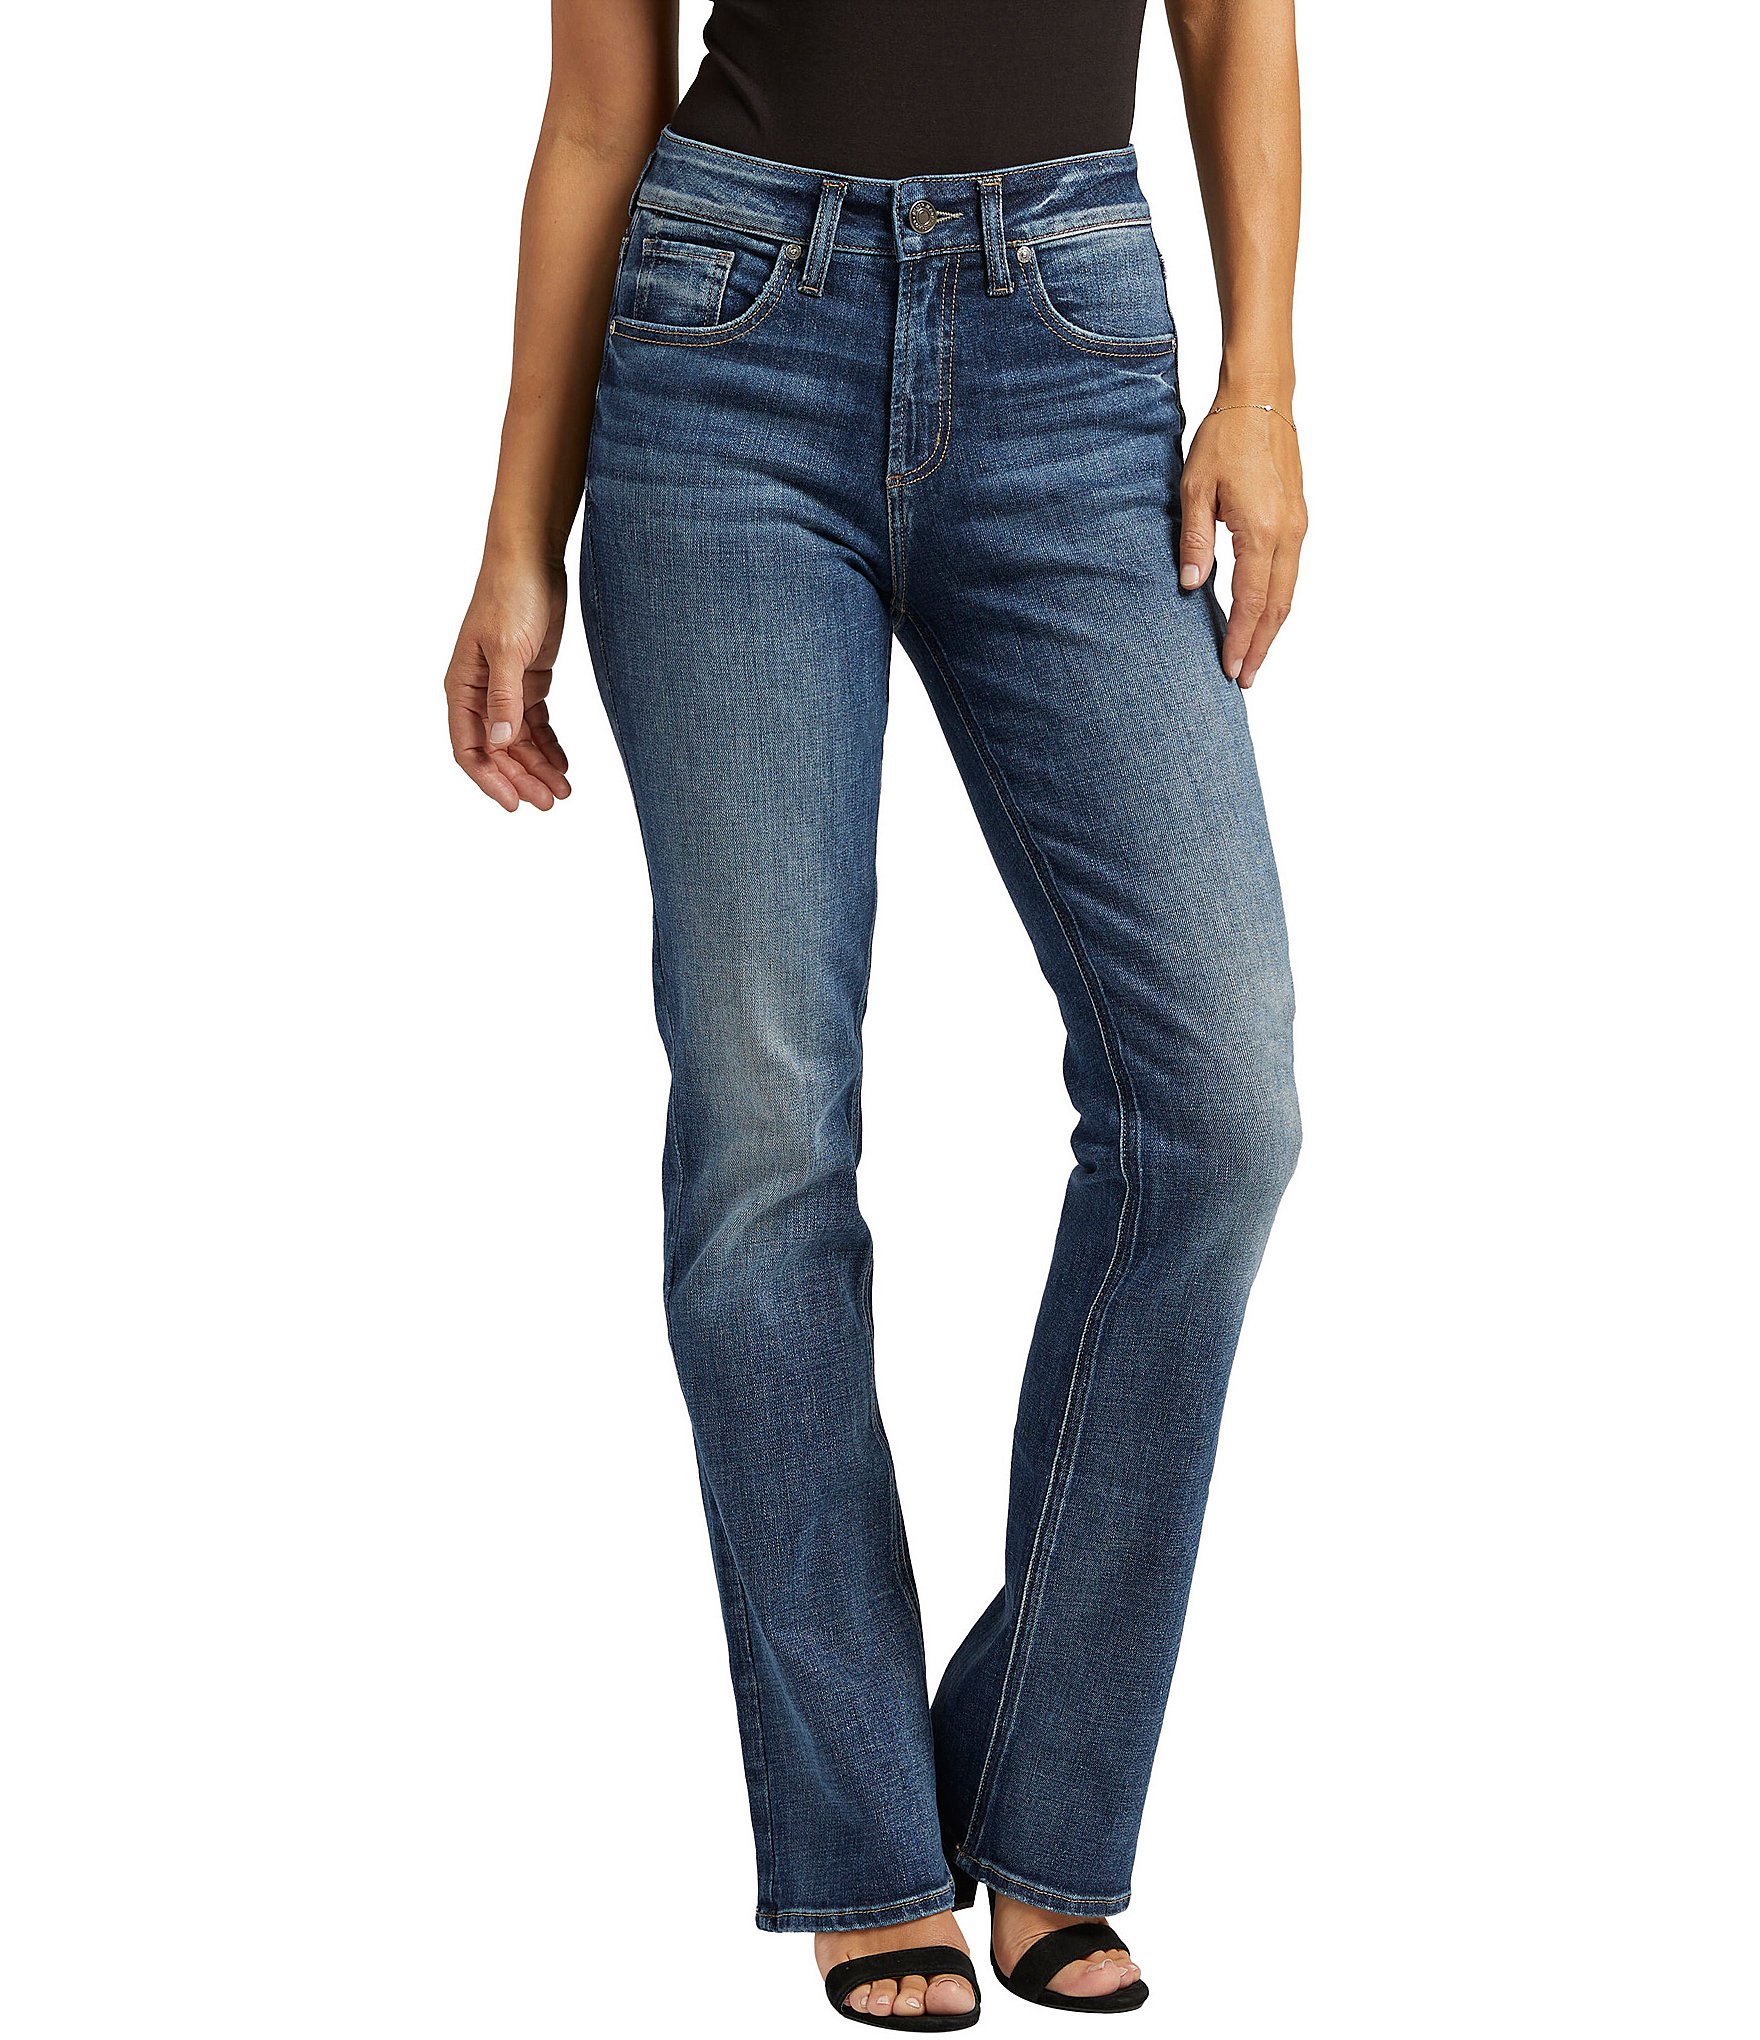 Silver Jeans Co. Avery High Rise Bootcut Jeans | Dillard's